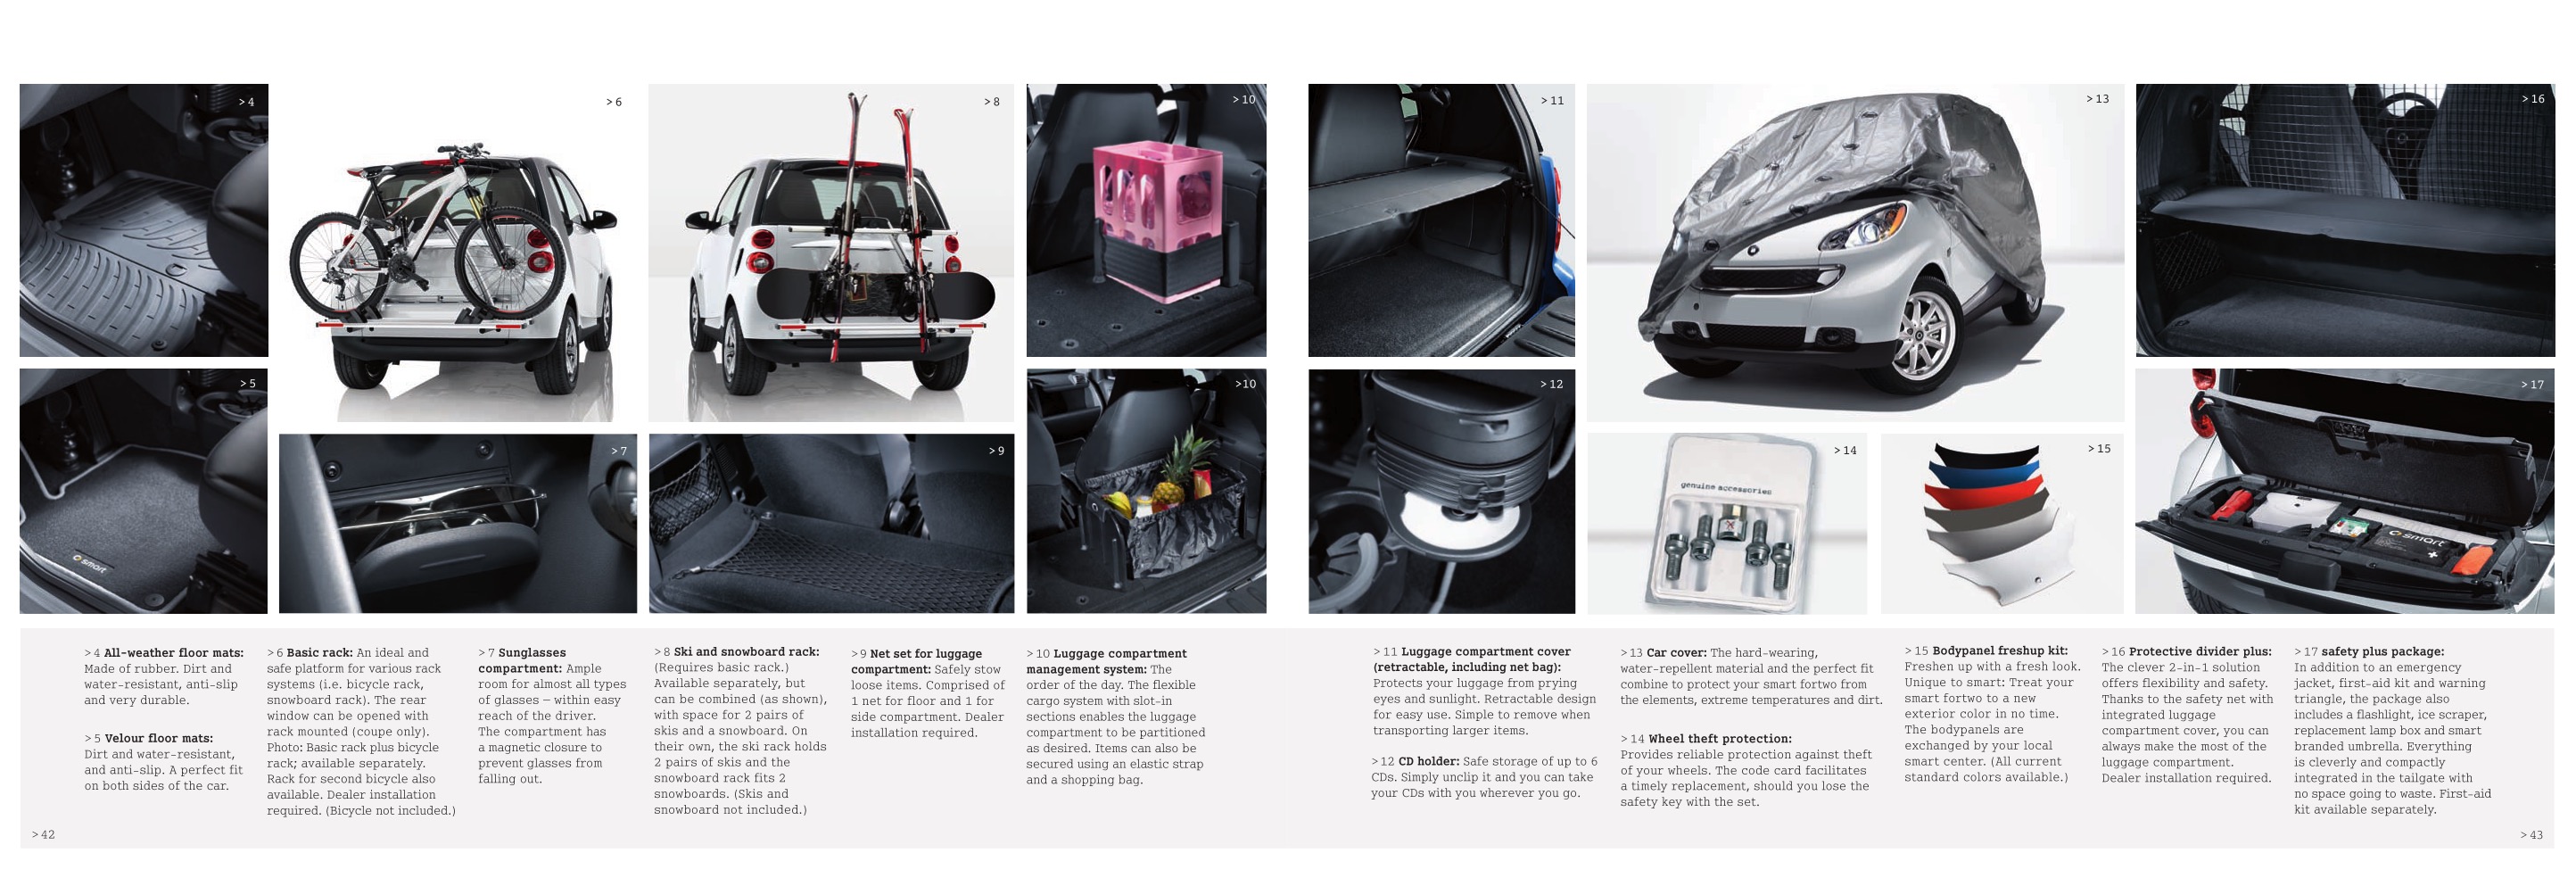 2009 Smart Fortwo Brochure Page 2